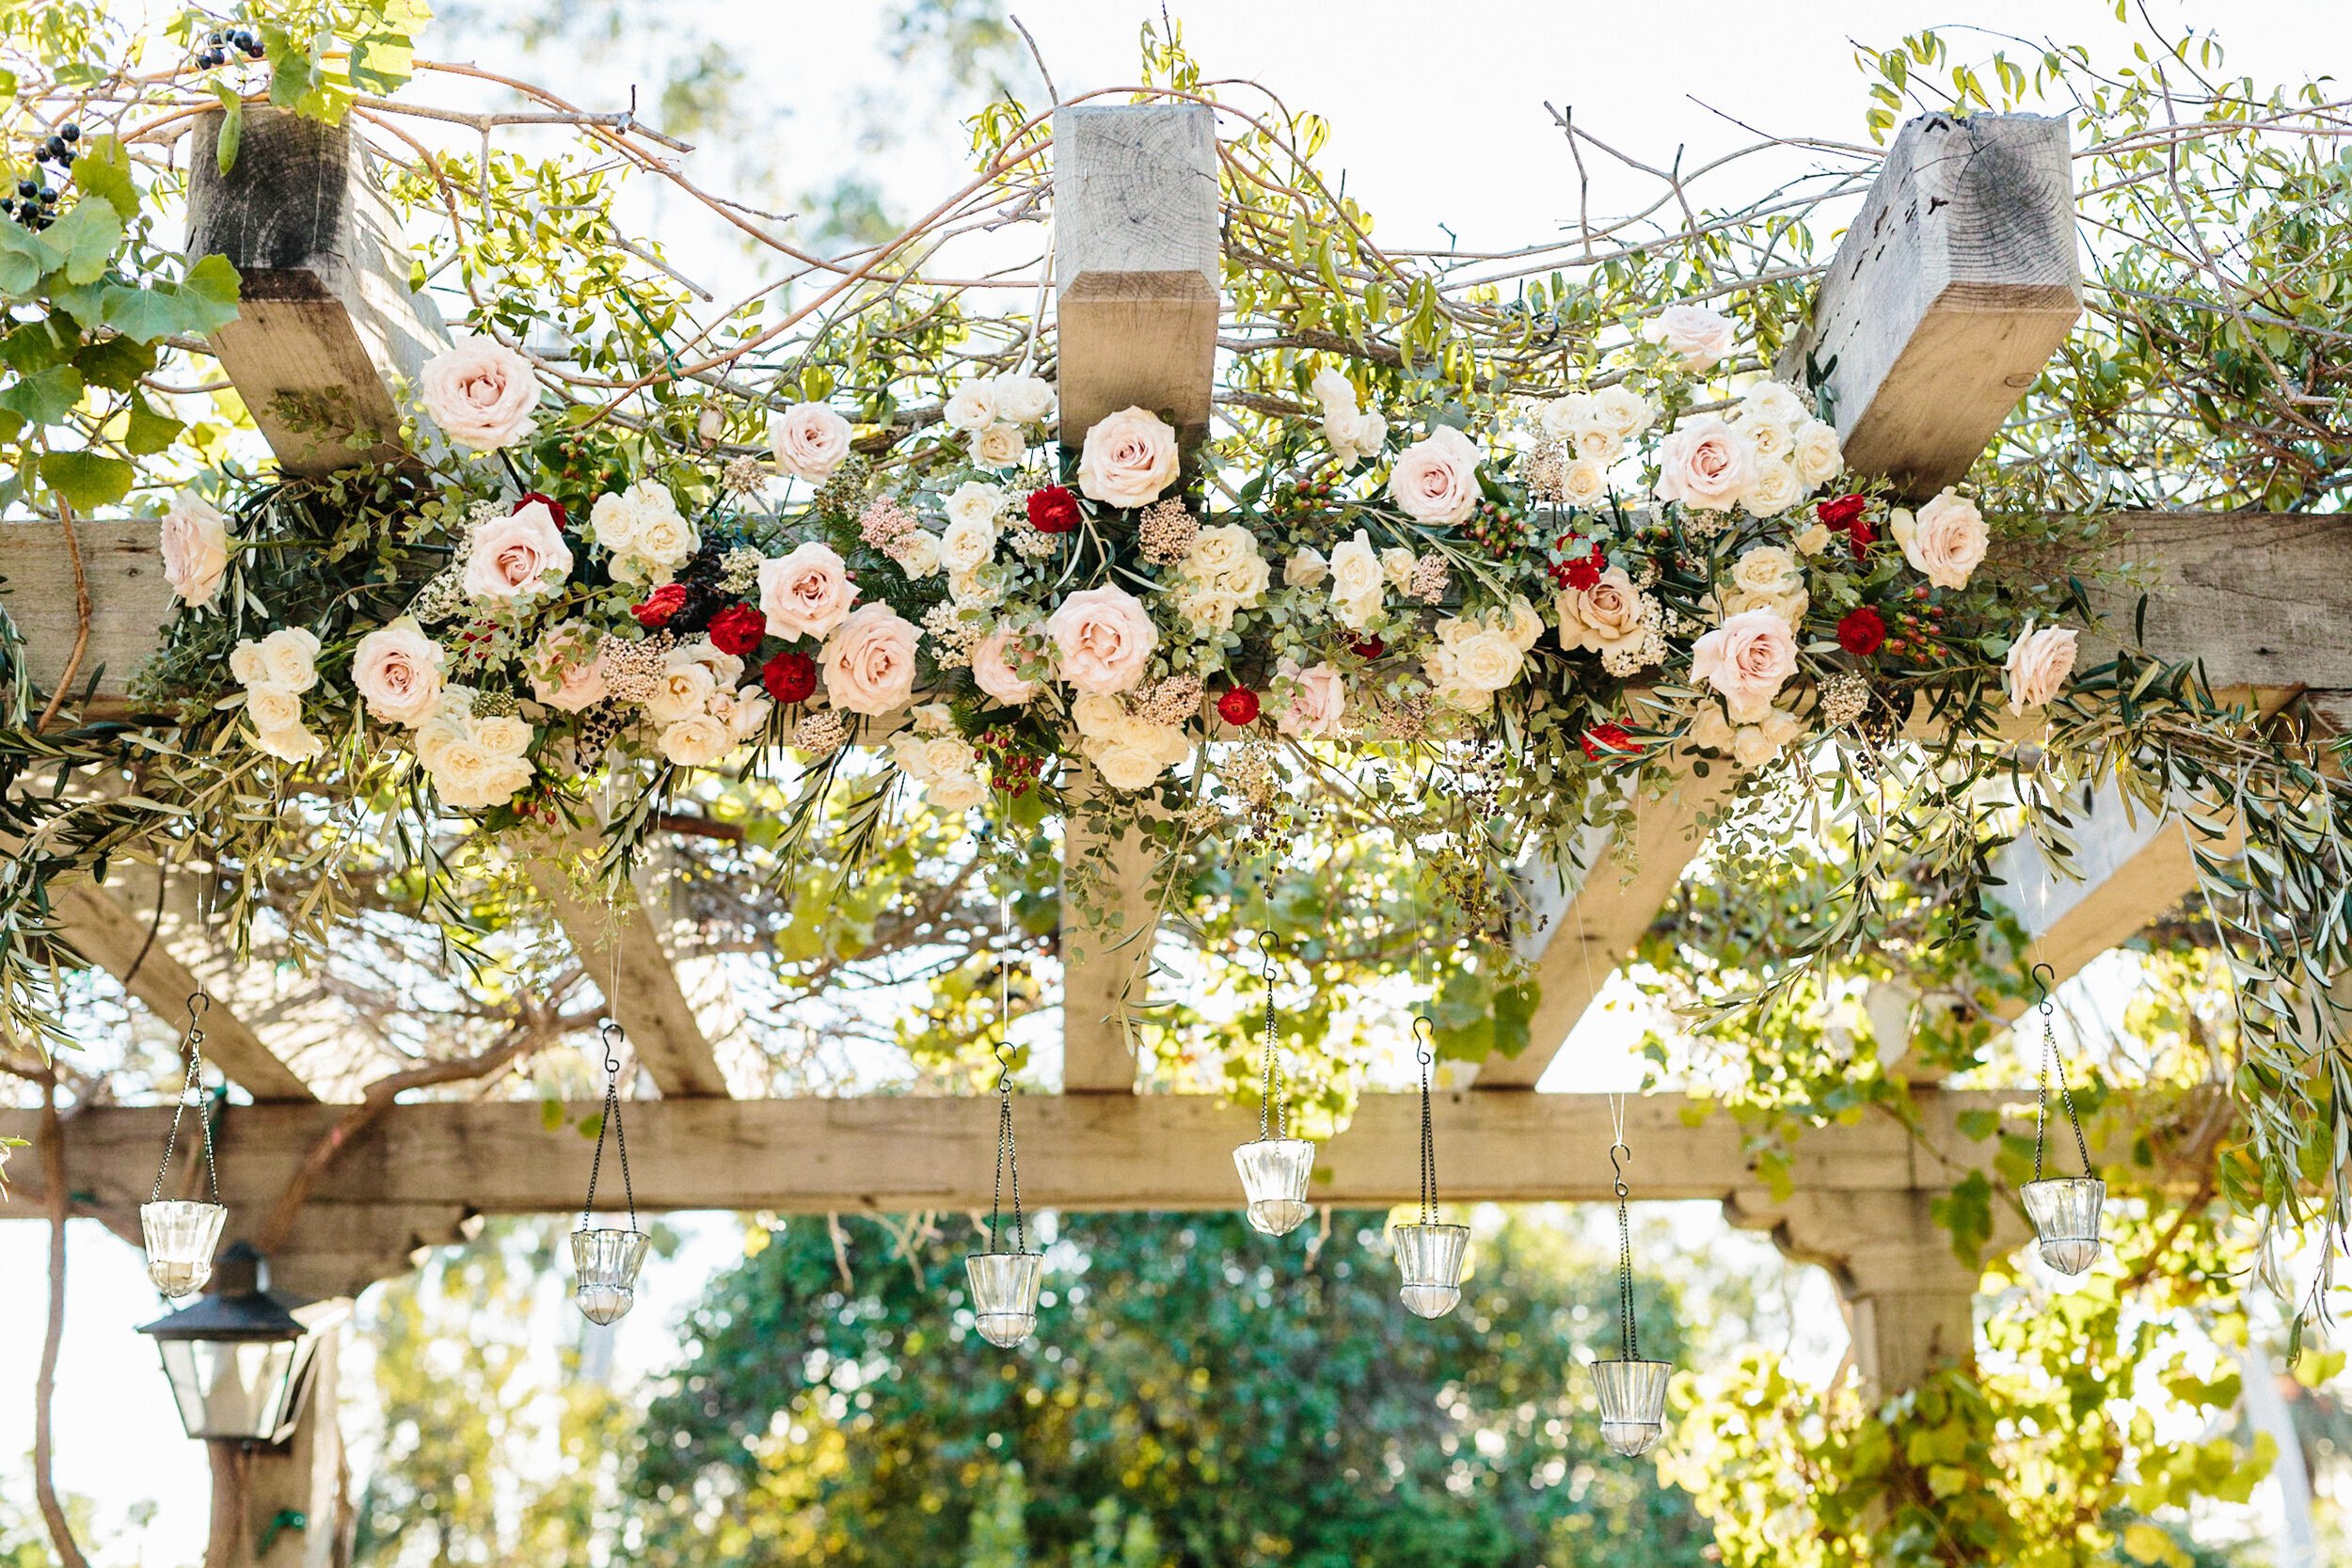 www.santabarbarawedding.com | Hannah Rose Gray Photography | Alexis Ireland Florals | Wedding Arch Decorated with Flowers